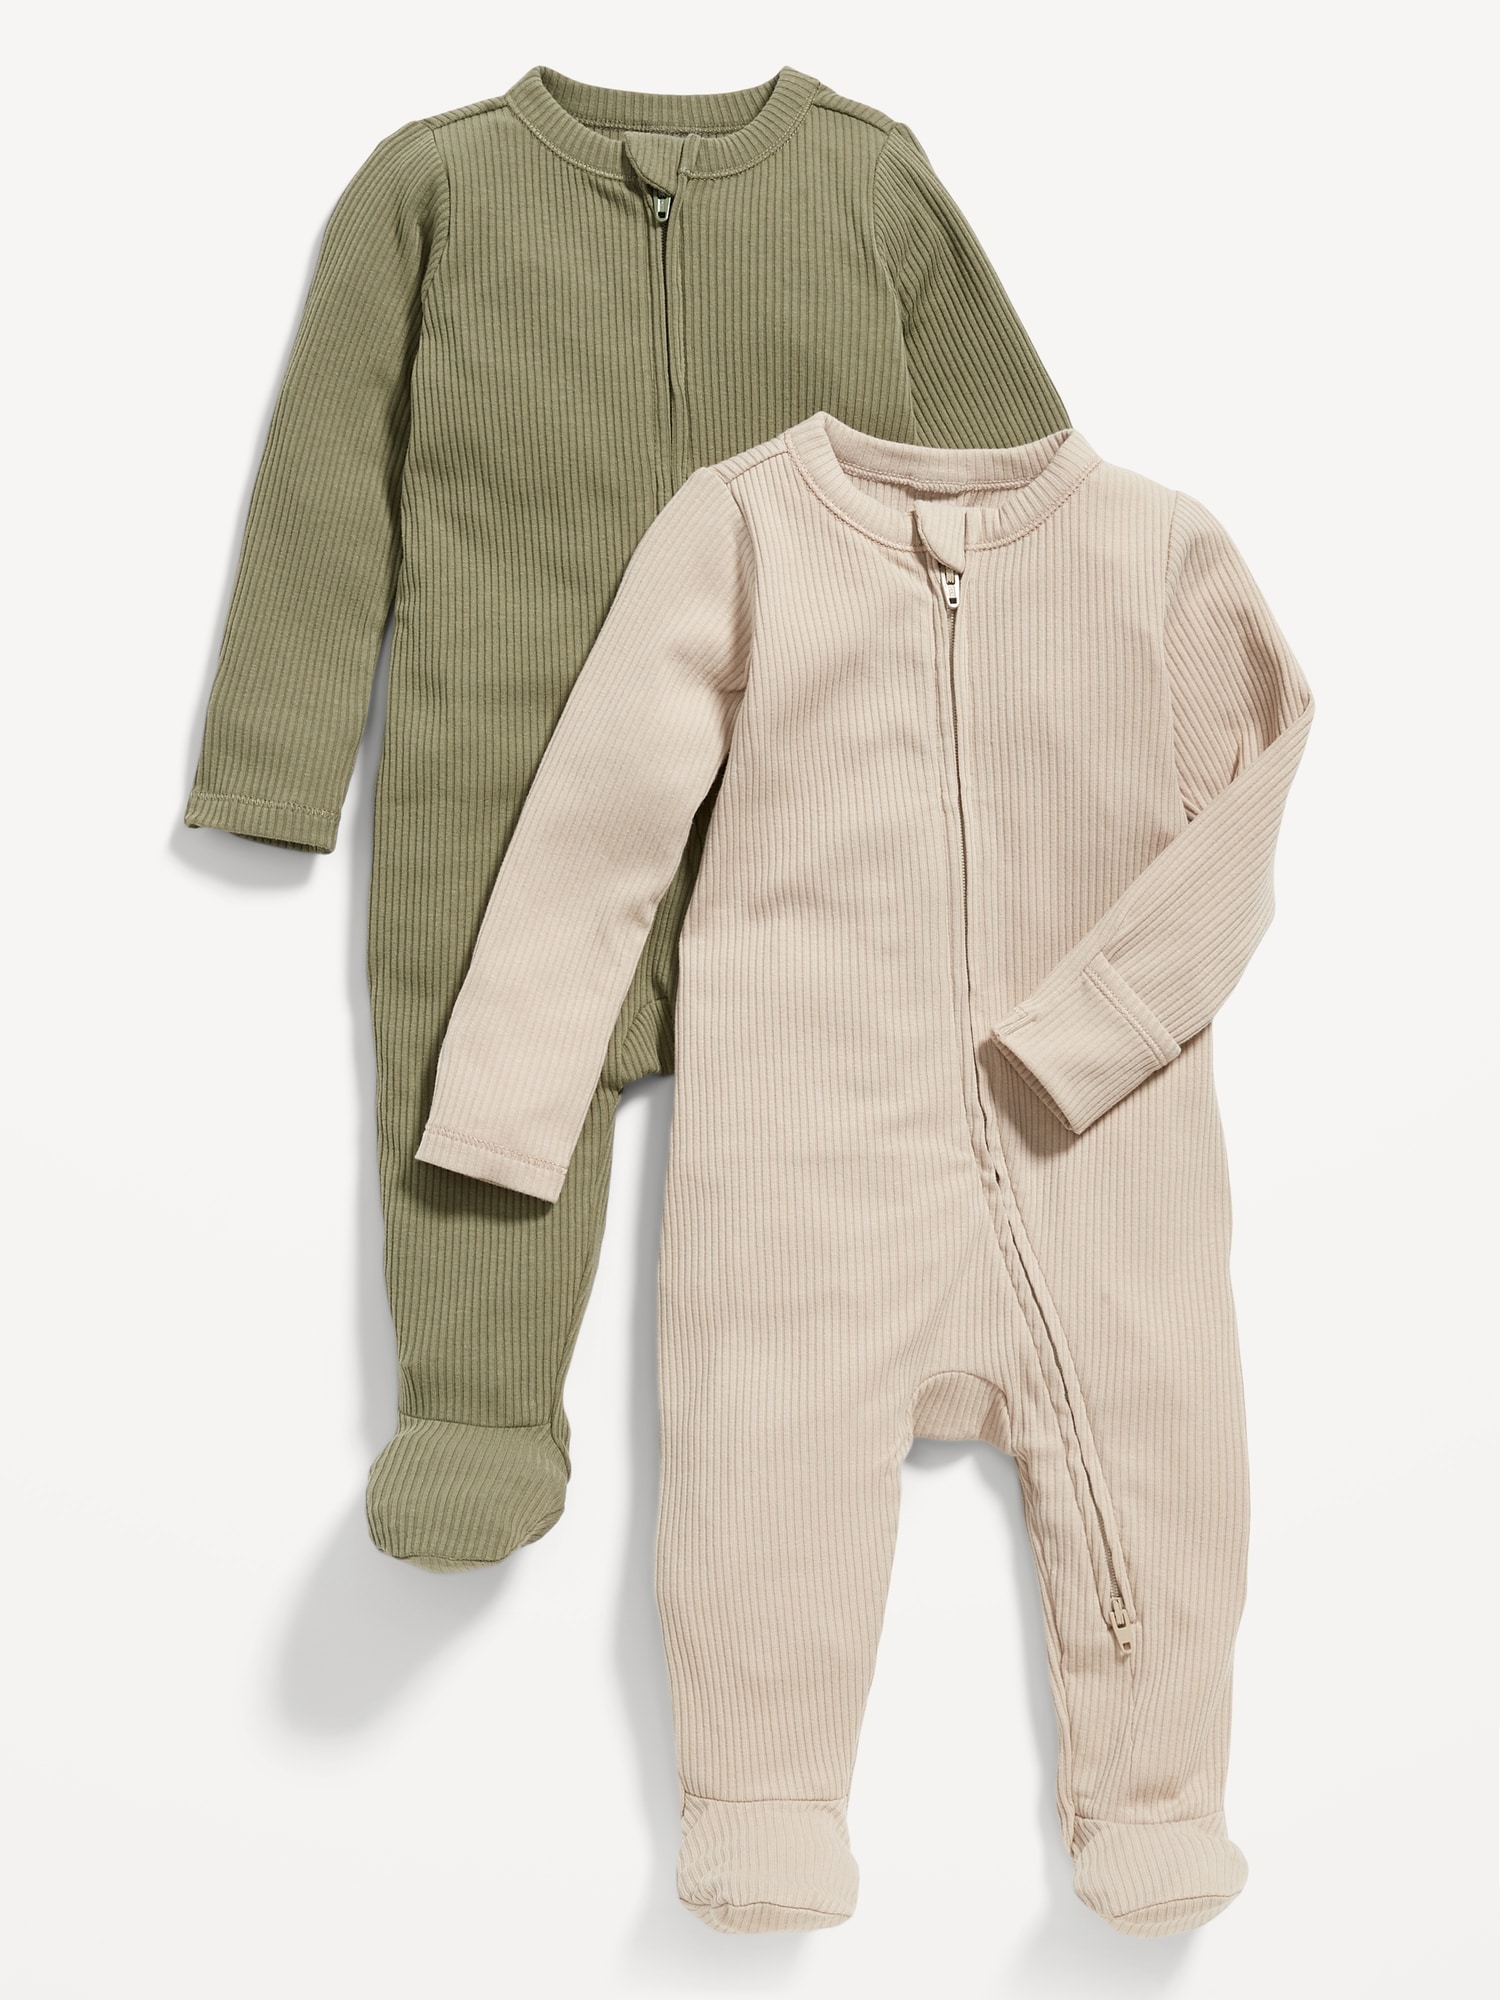 Old Navy Unisex 2-Way-Zip Sleep & Play Footed One-Piece 2-Pack for Baby beige. 1